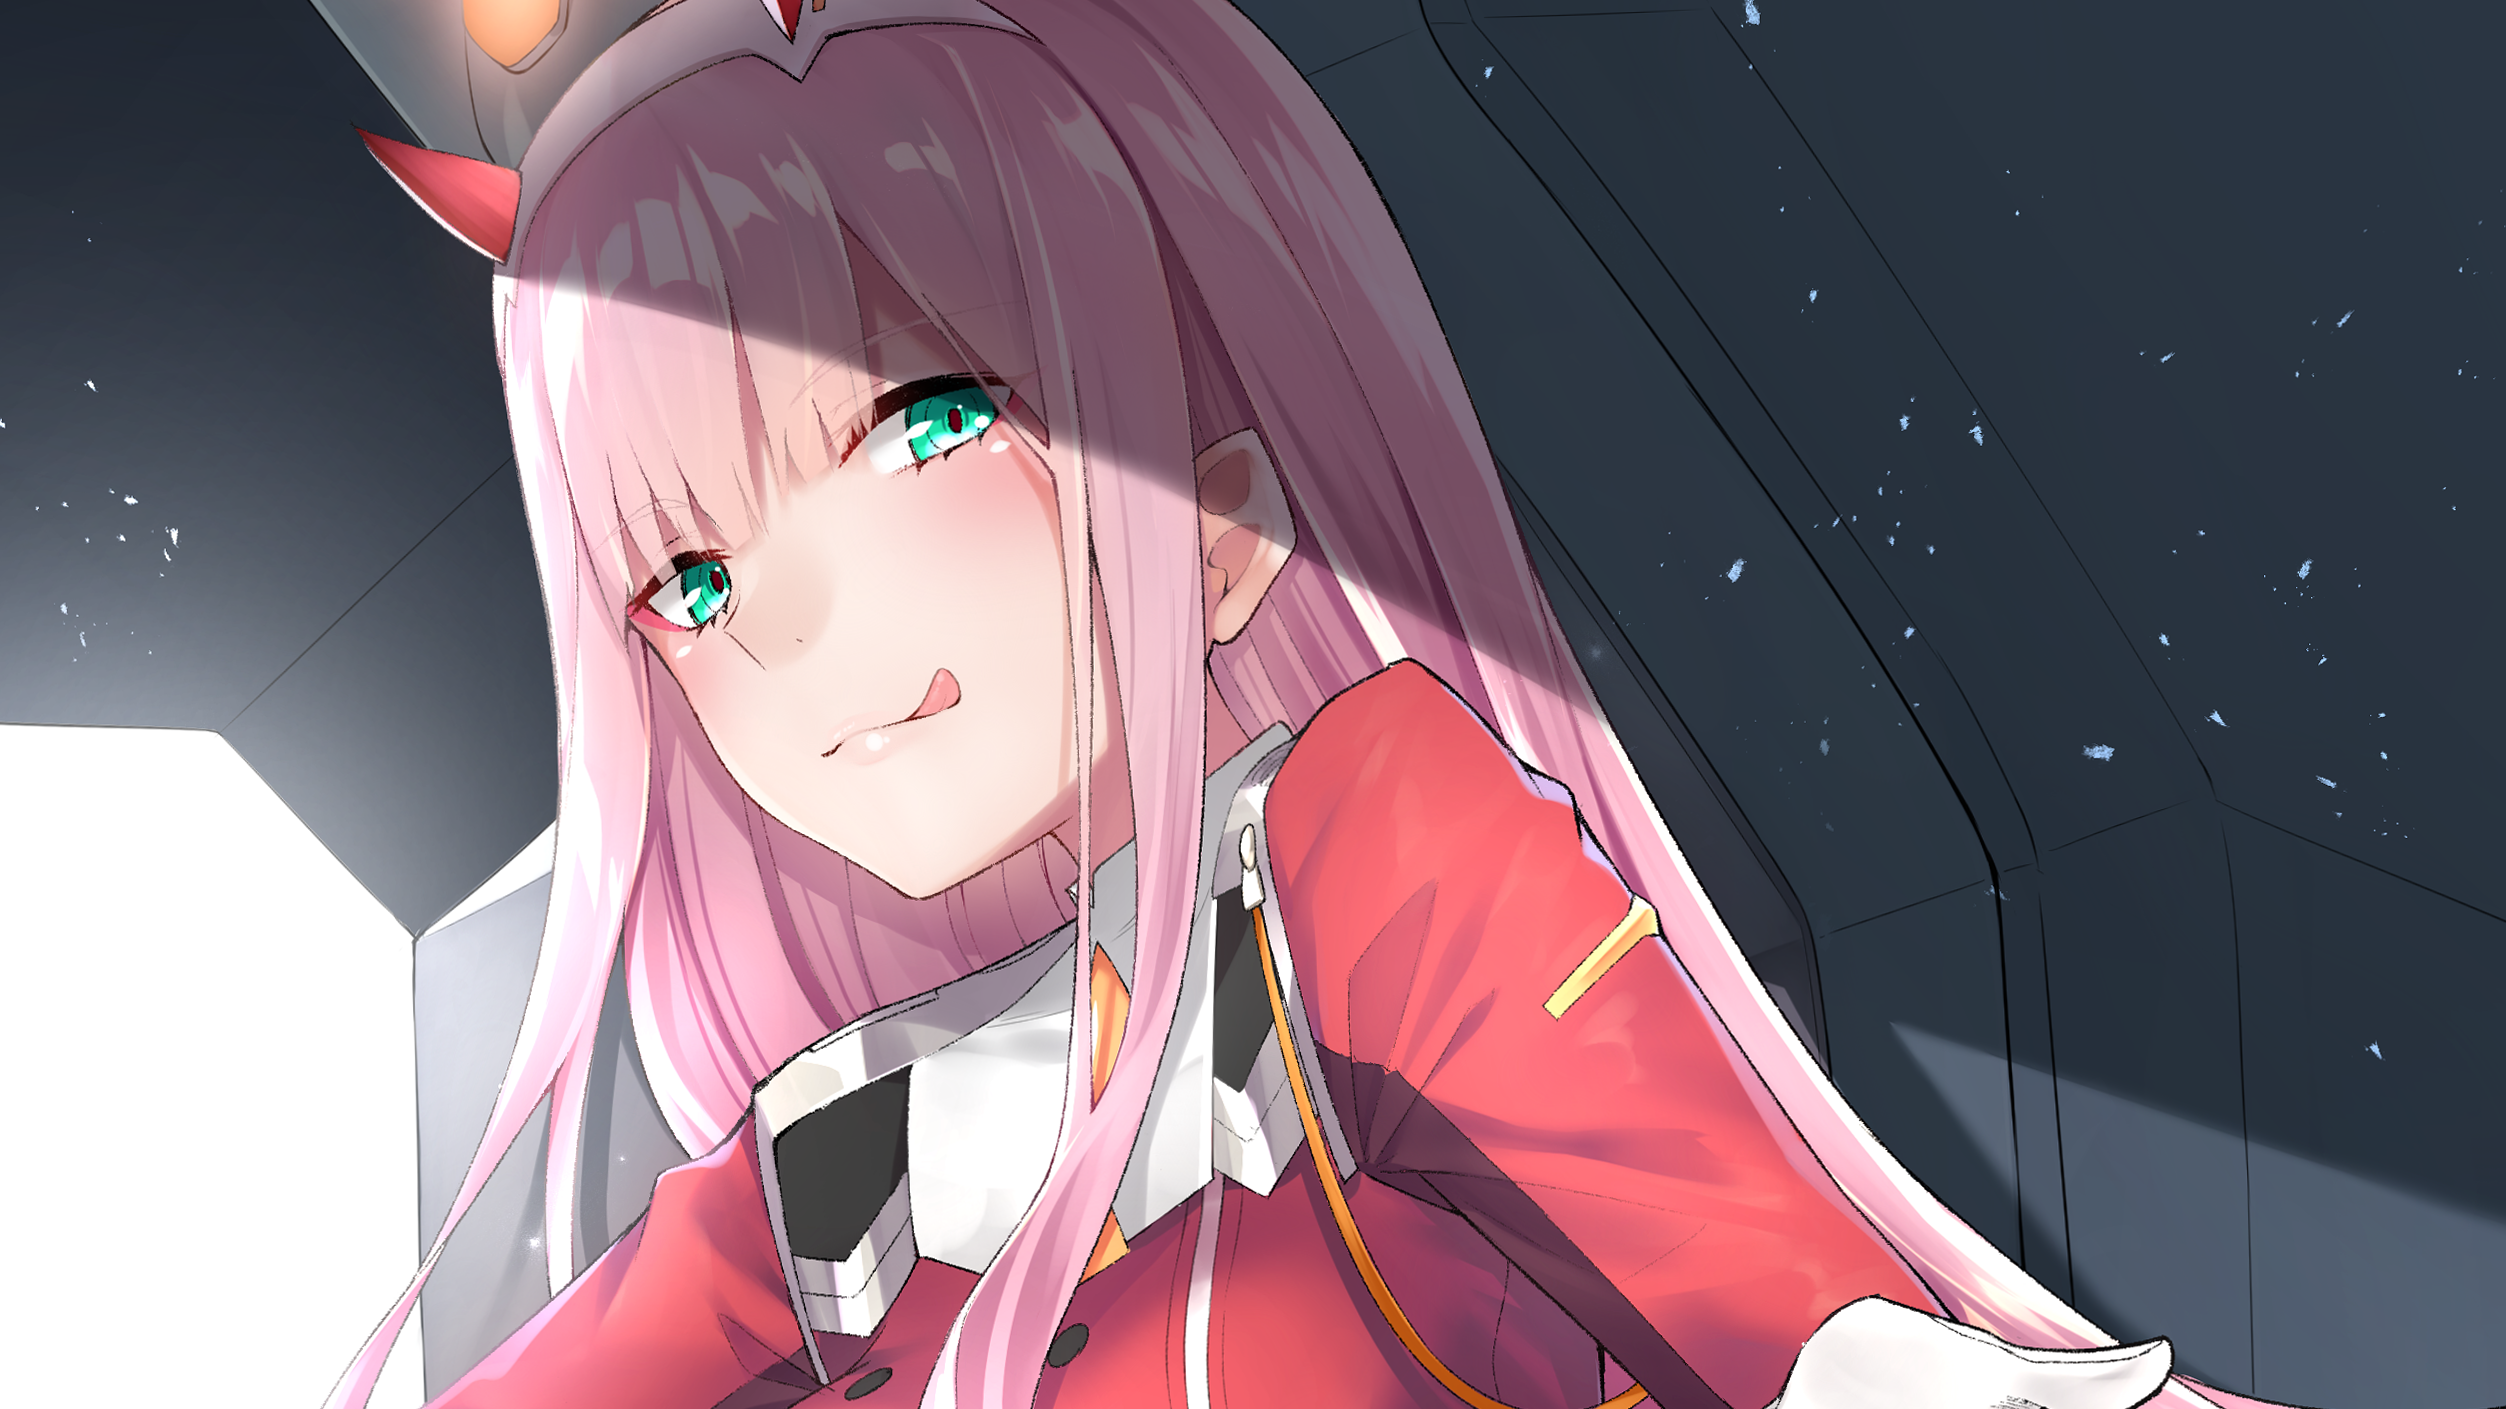 Zero Two Wallpaper Collection. Darling in the franxx, Zero two, Anime